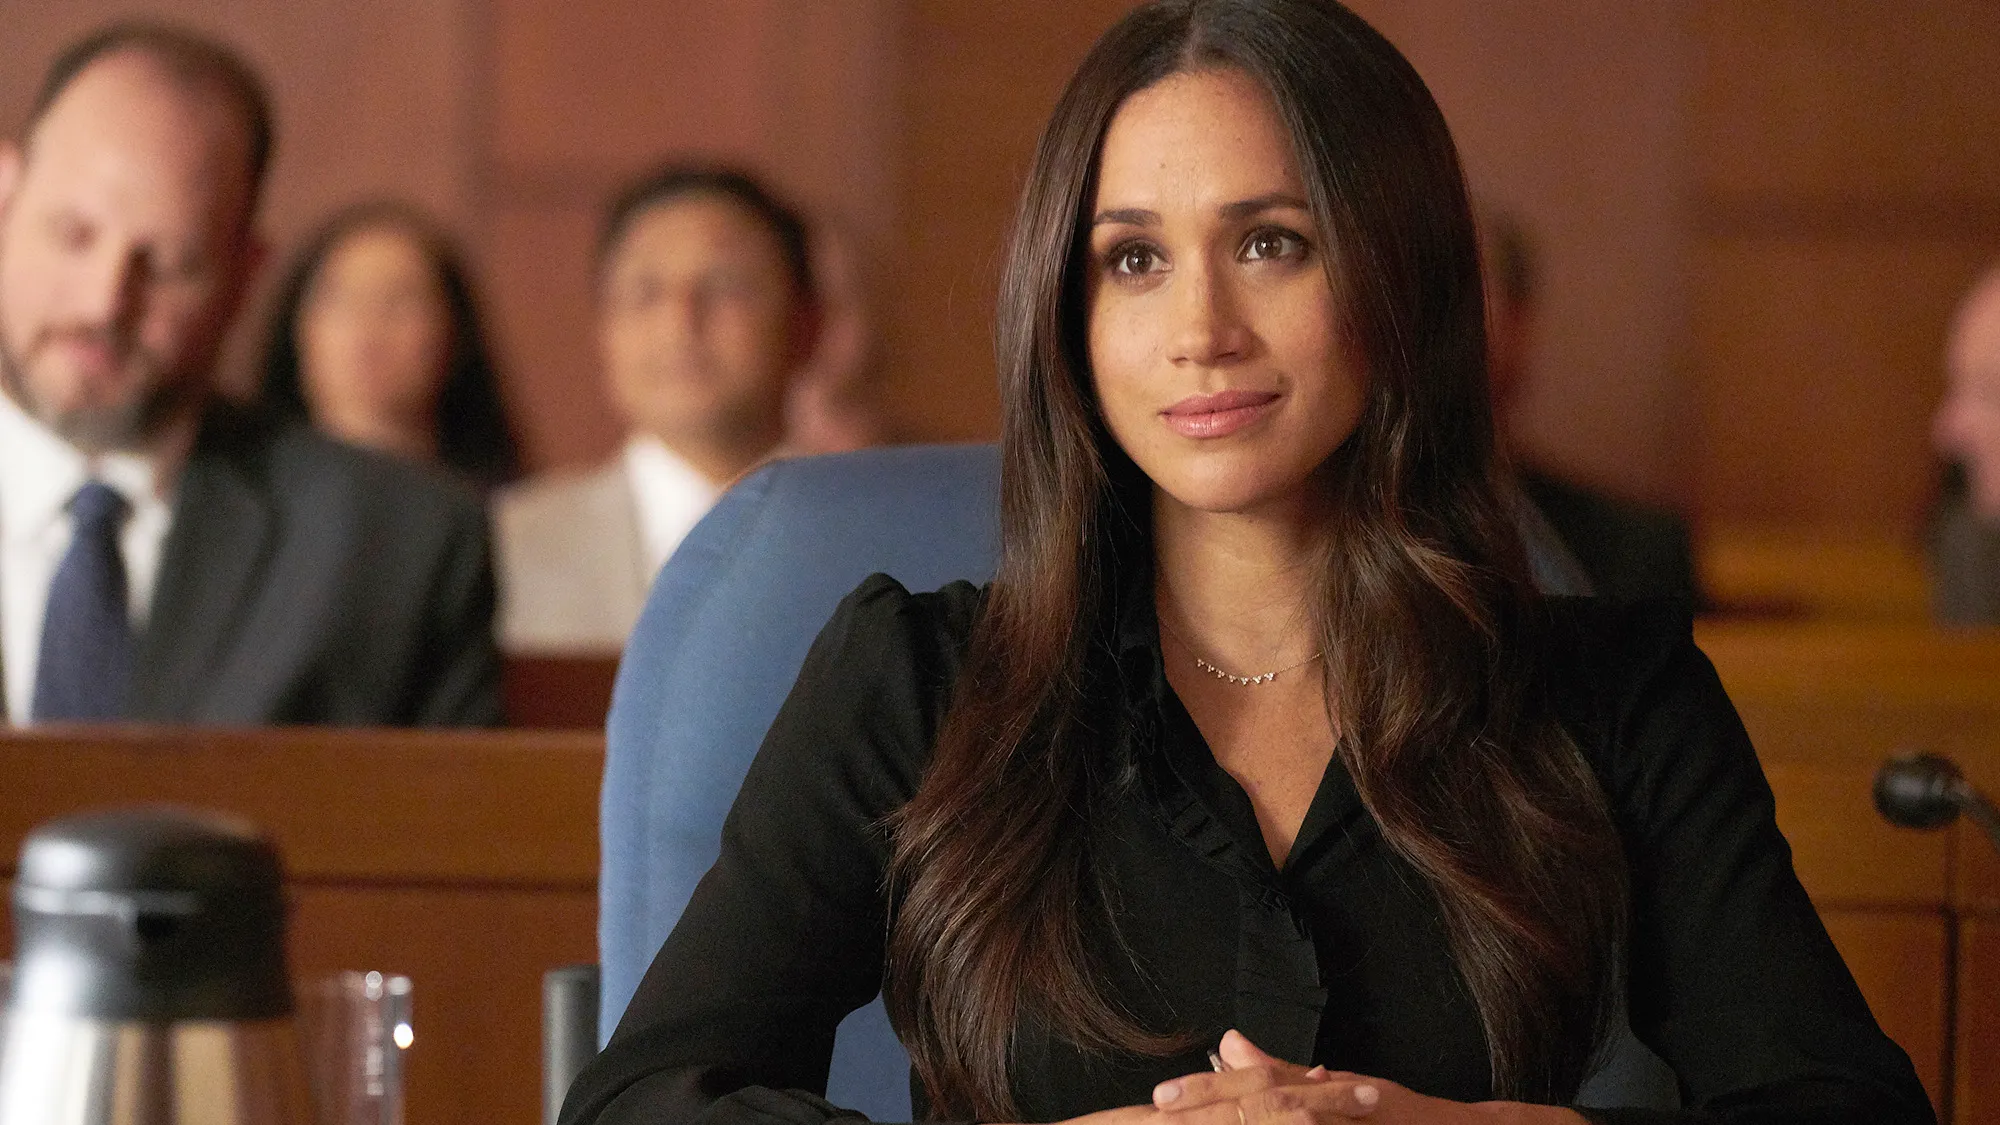 Meghan Markle in Suits